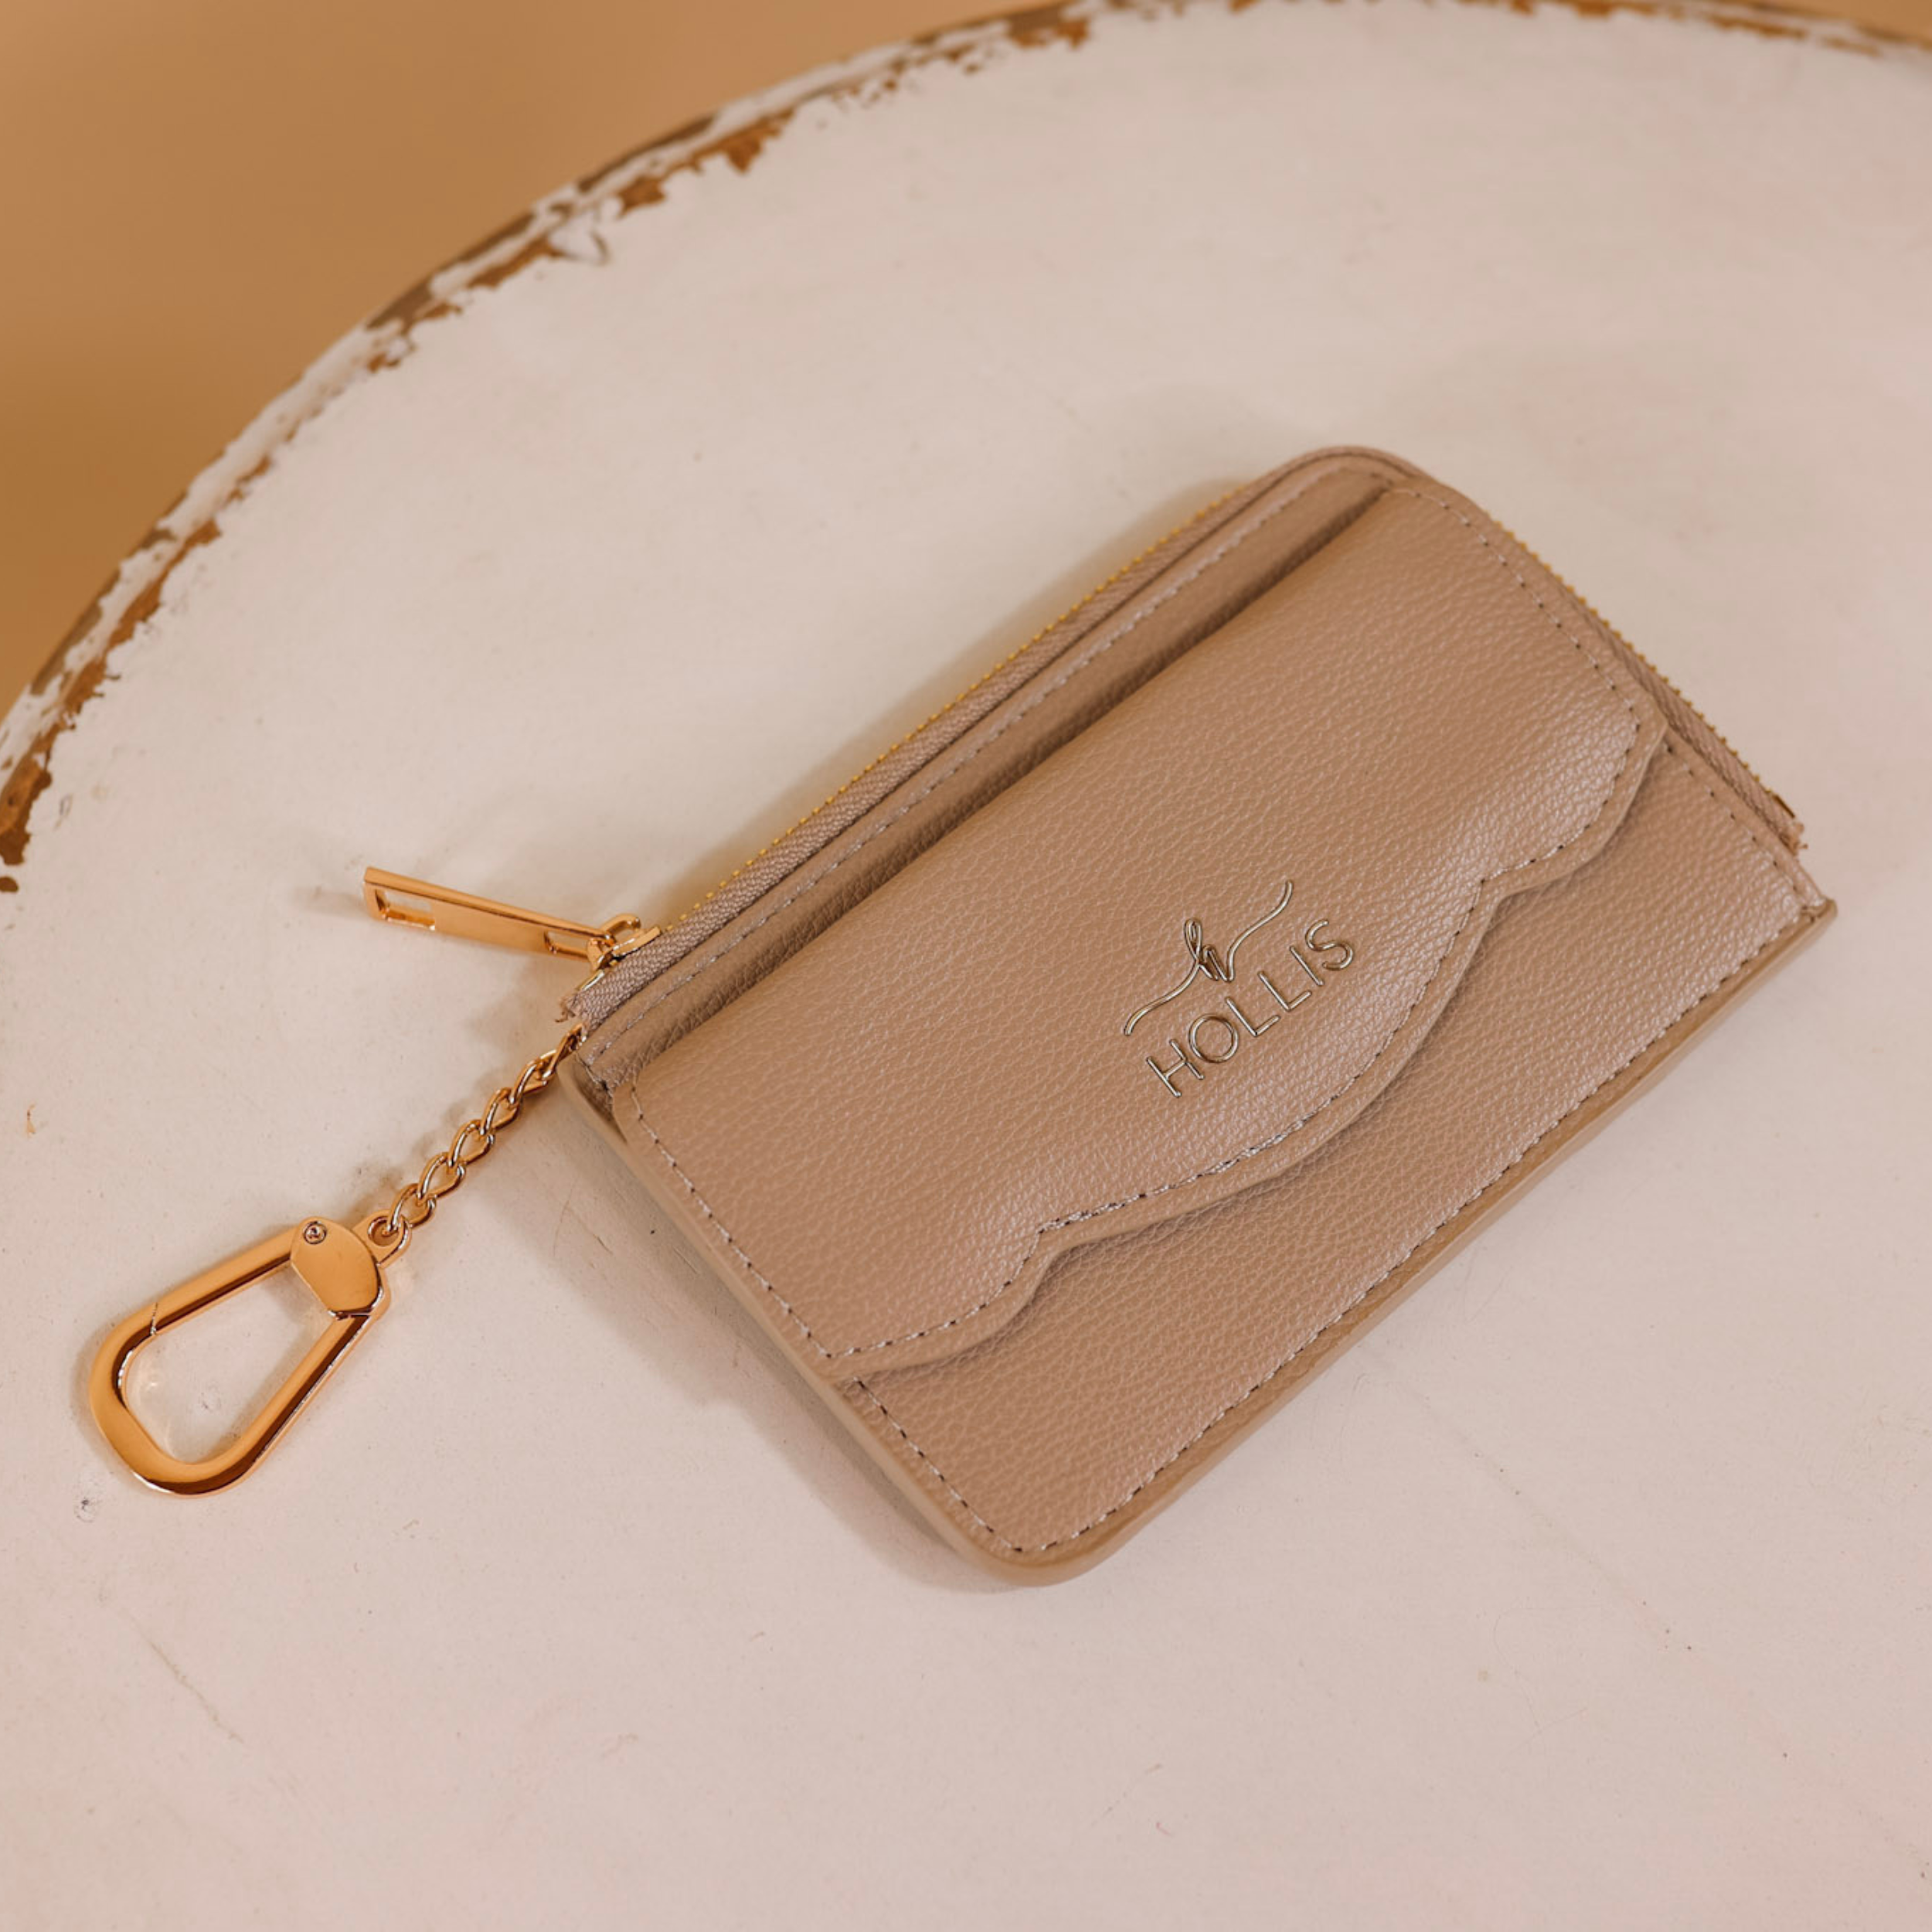 A nude card holder is laid in the center of the picture. Background is solid white.